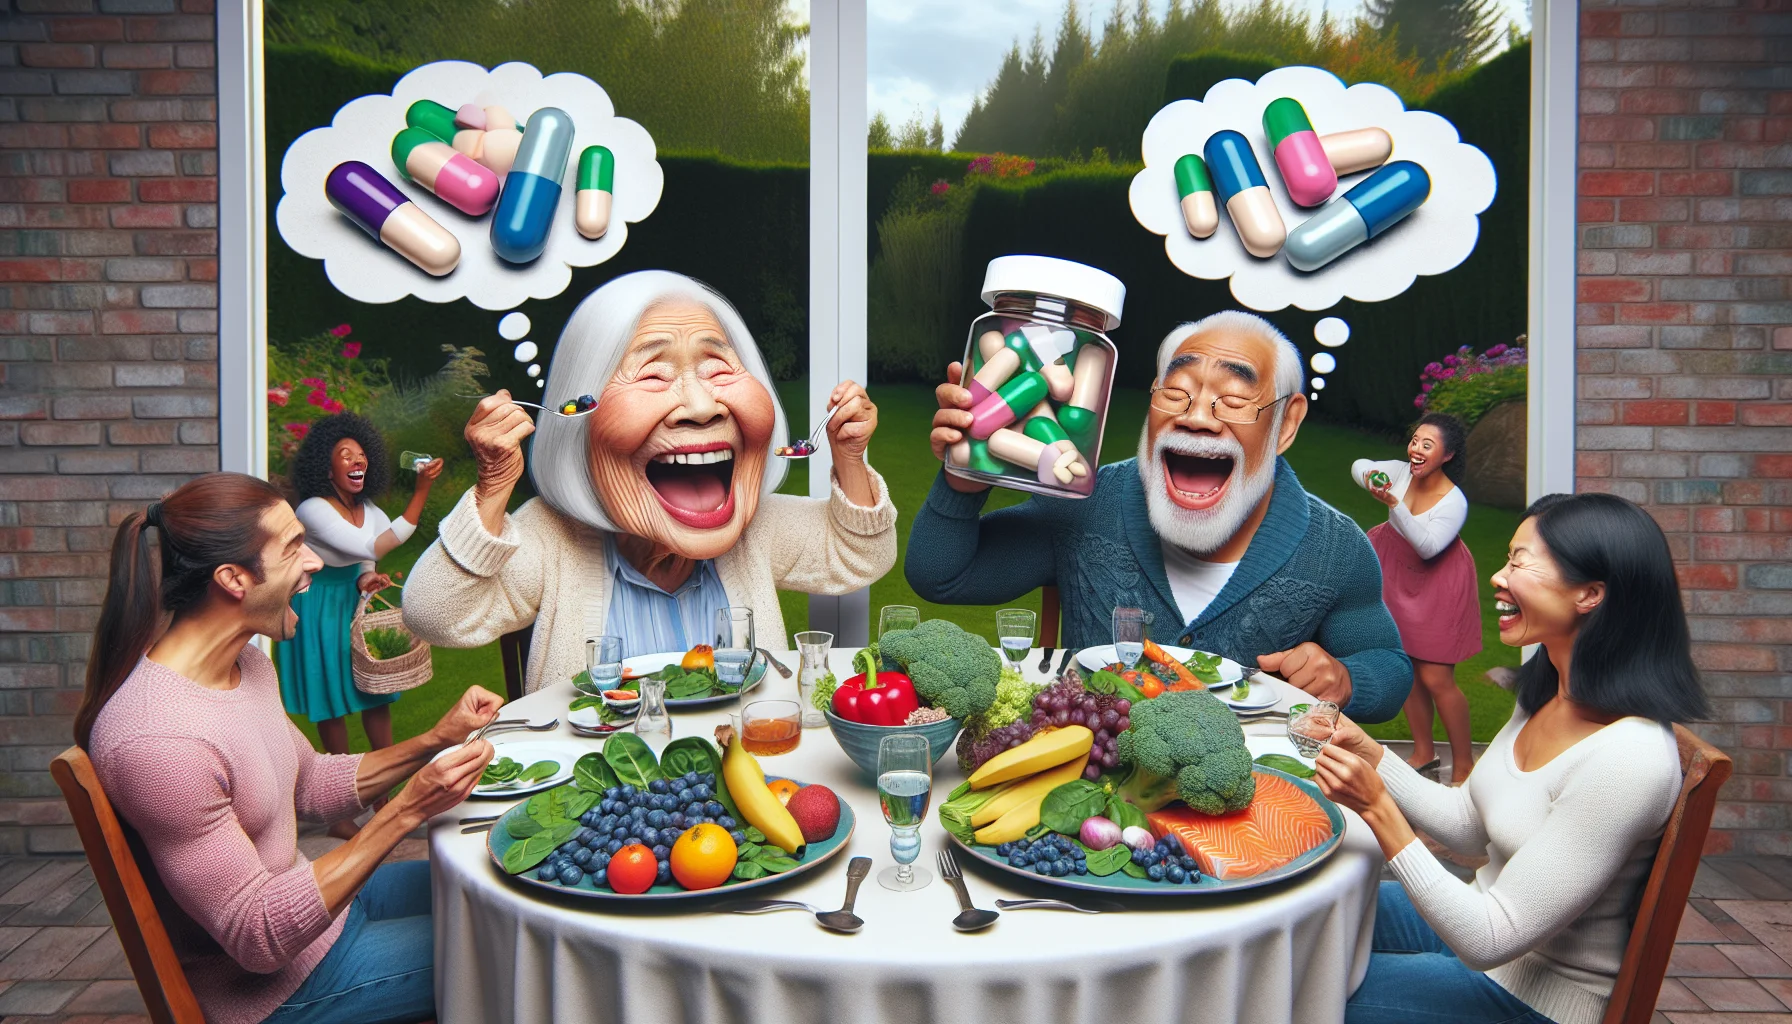 Imagine a whimsical scene at a dinner table set in a beautiful outdoor garden. A lively Caucasian elderly woman and an Asian older man are sitting down, each with huge grinning expressions. They both are humorously oversized, opening colourful pill bottles labeled 'Skin Anti-Aging Supplements'. A plateau full of fresh fruits and vegetables lie in front of them, with thought bubbles showing they believe these supplements are a magical solution to aging. Around them, silent helpers, a black male and a white female are trying to cope with laughter while offering plates of blueberries, spinach, and salmon, known to be naturally beneficial for skin.